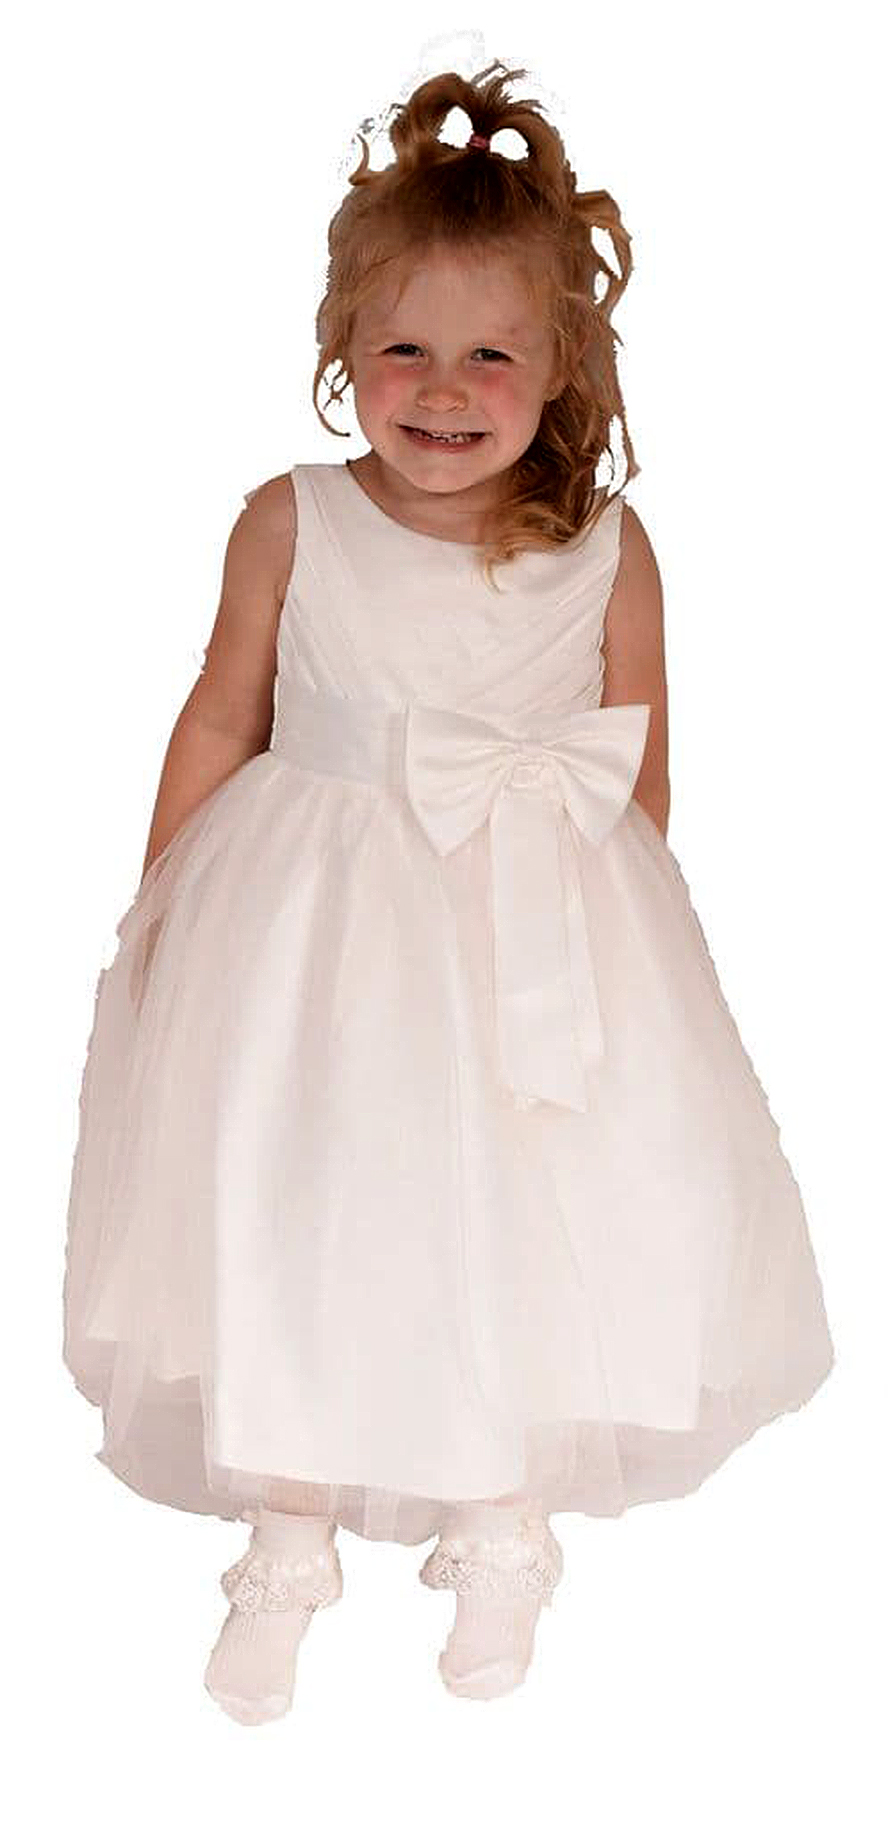 The sweet Sophia dress perfect for the little ones for their big formal events!